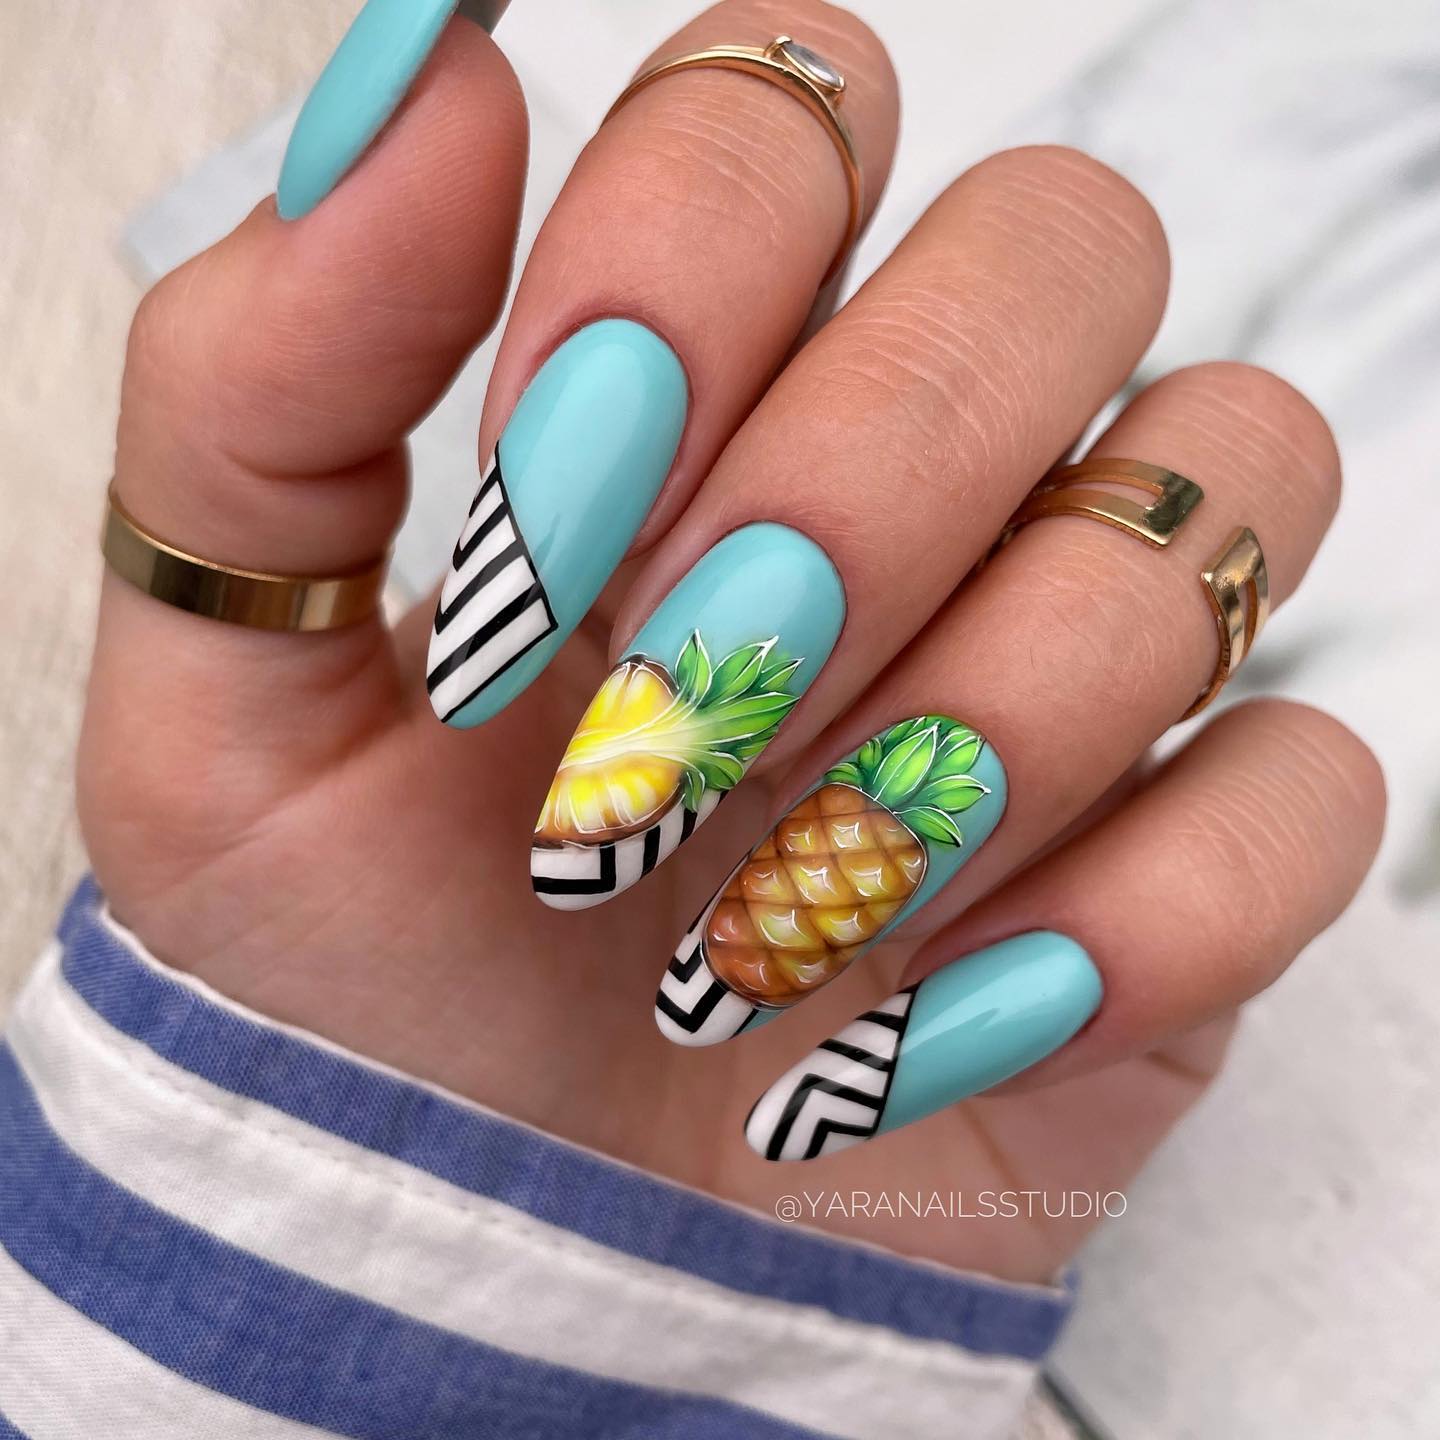 Amazon.com: Pineapple Nail Art Decal Sticker : Beauty & Personal Care